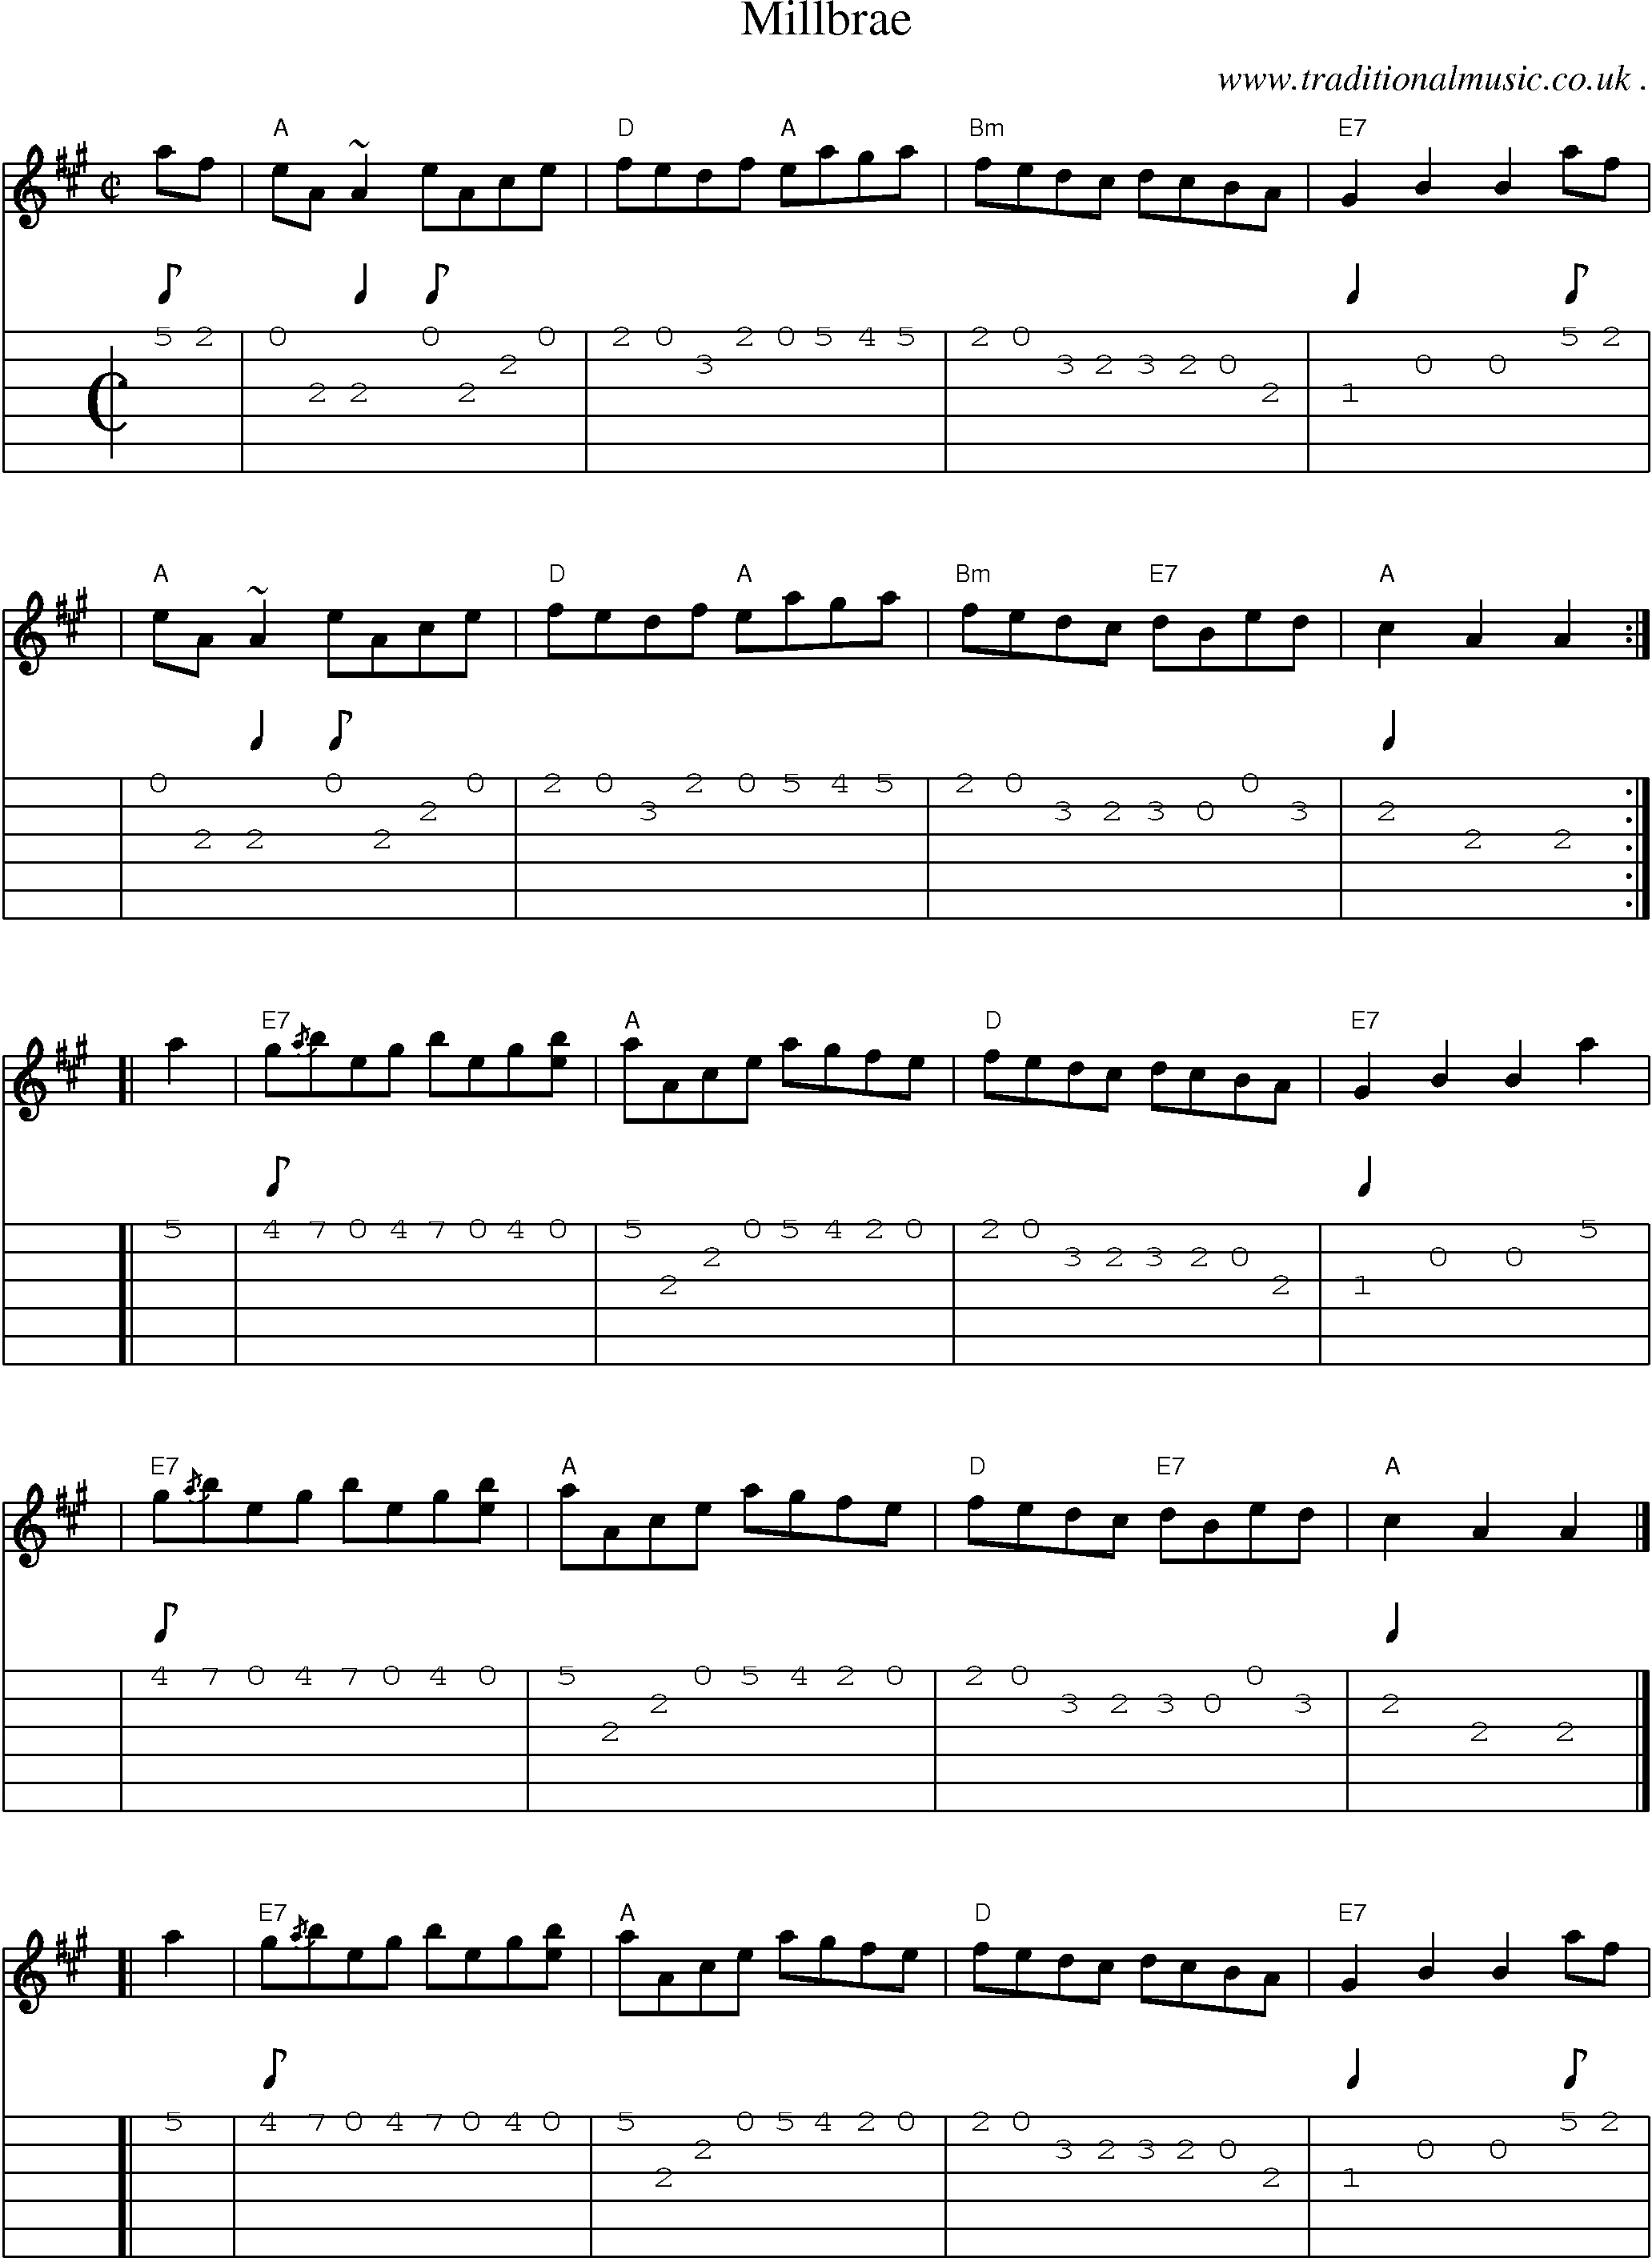 Sheet-music  score, Chords and Guitar Tabs for Millbrae